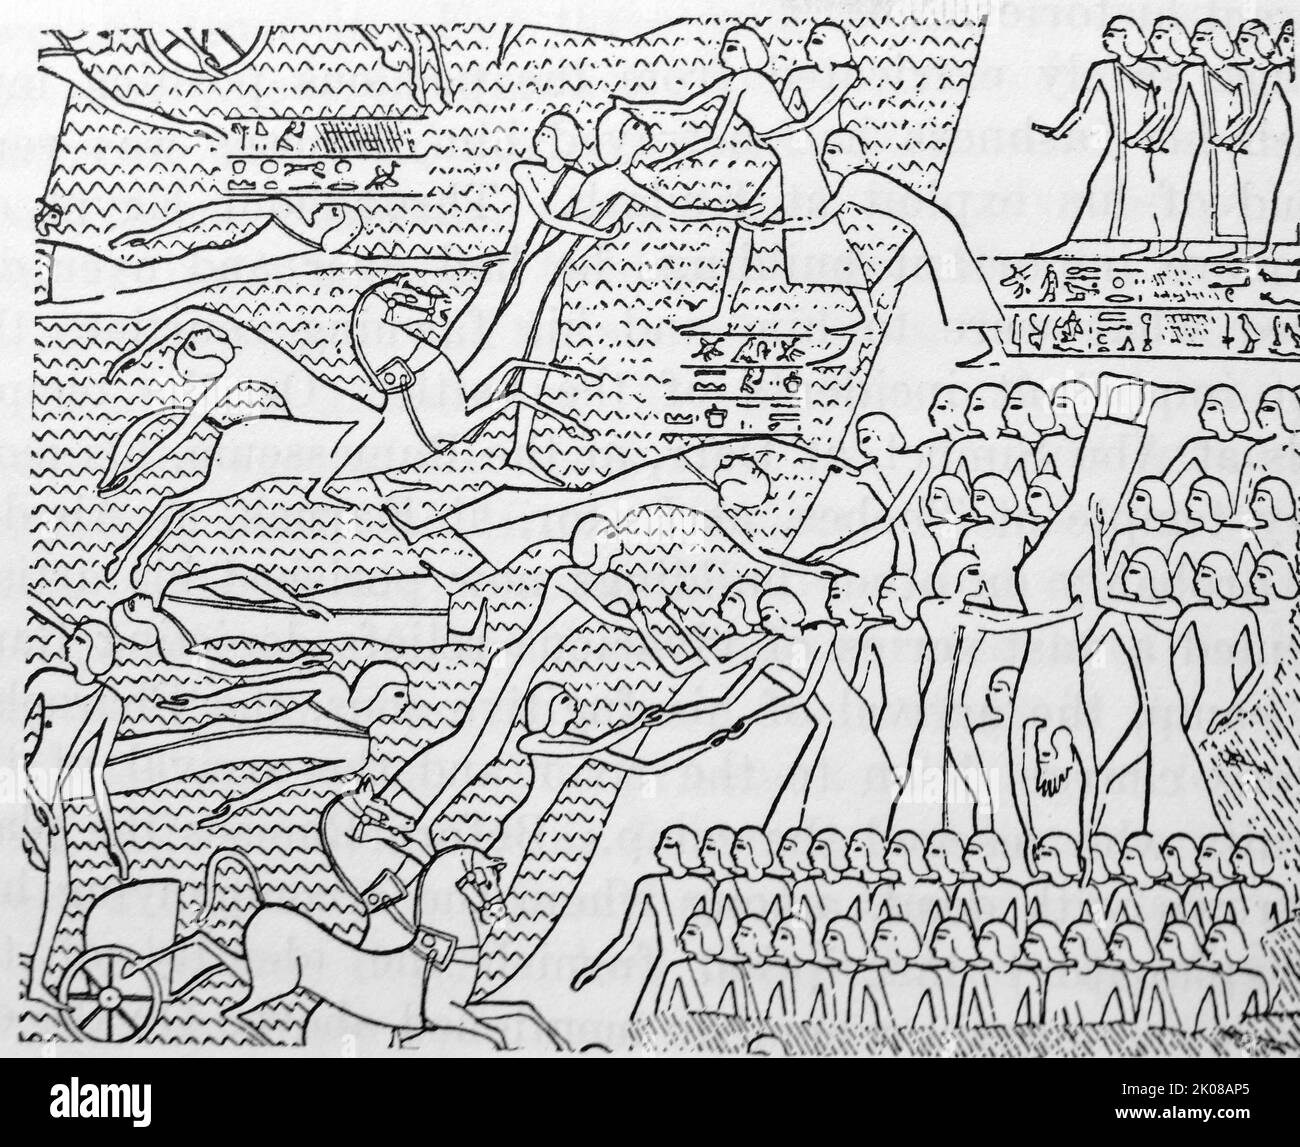 Scene from the Reliefs of the Battle of Kadesh in 1274 BC. The Battle of Kadesh or Battle of Qadesh took place between the forces of the New Kingdom of Egypt under Ramesses II and the Hittite Empire under Muwatalli II at the city of Kadesh on the Orontes River, just upstream of Lake Homs near the modern Lebanon-Syria border Stock Photo